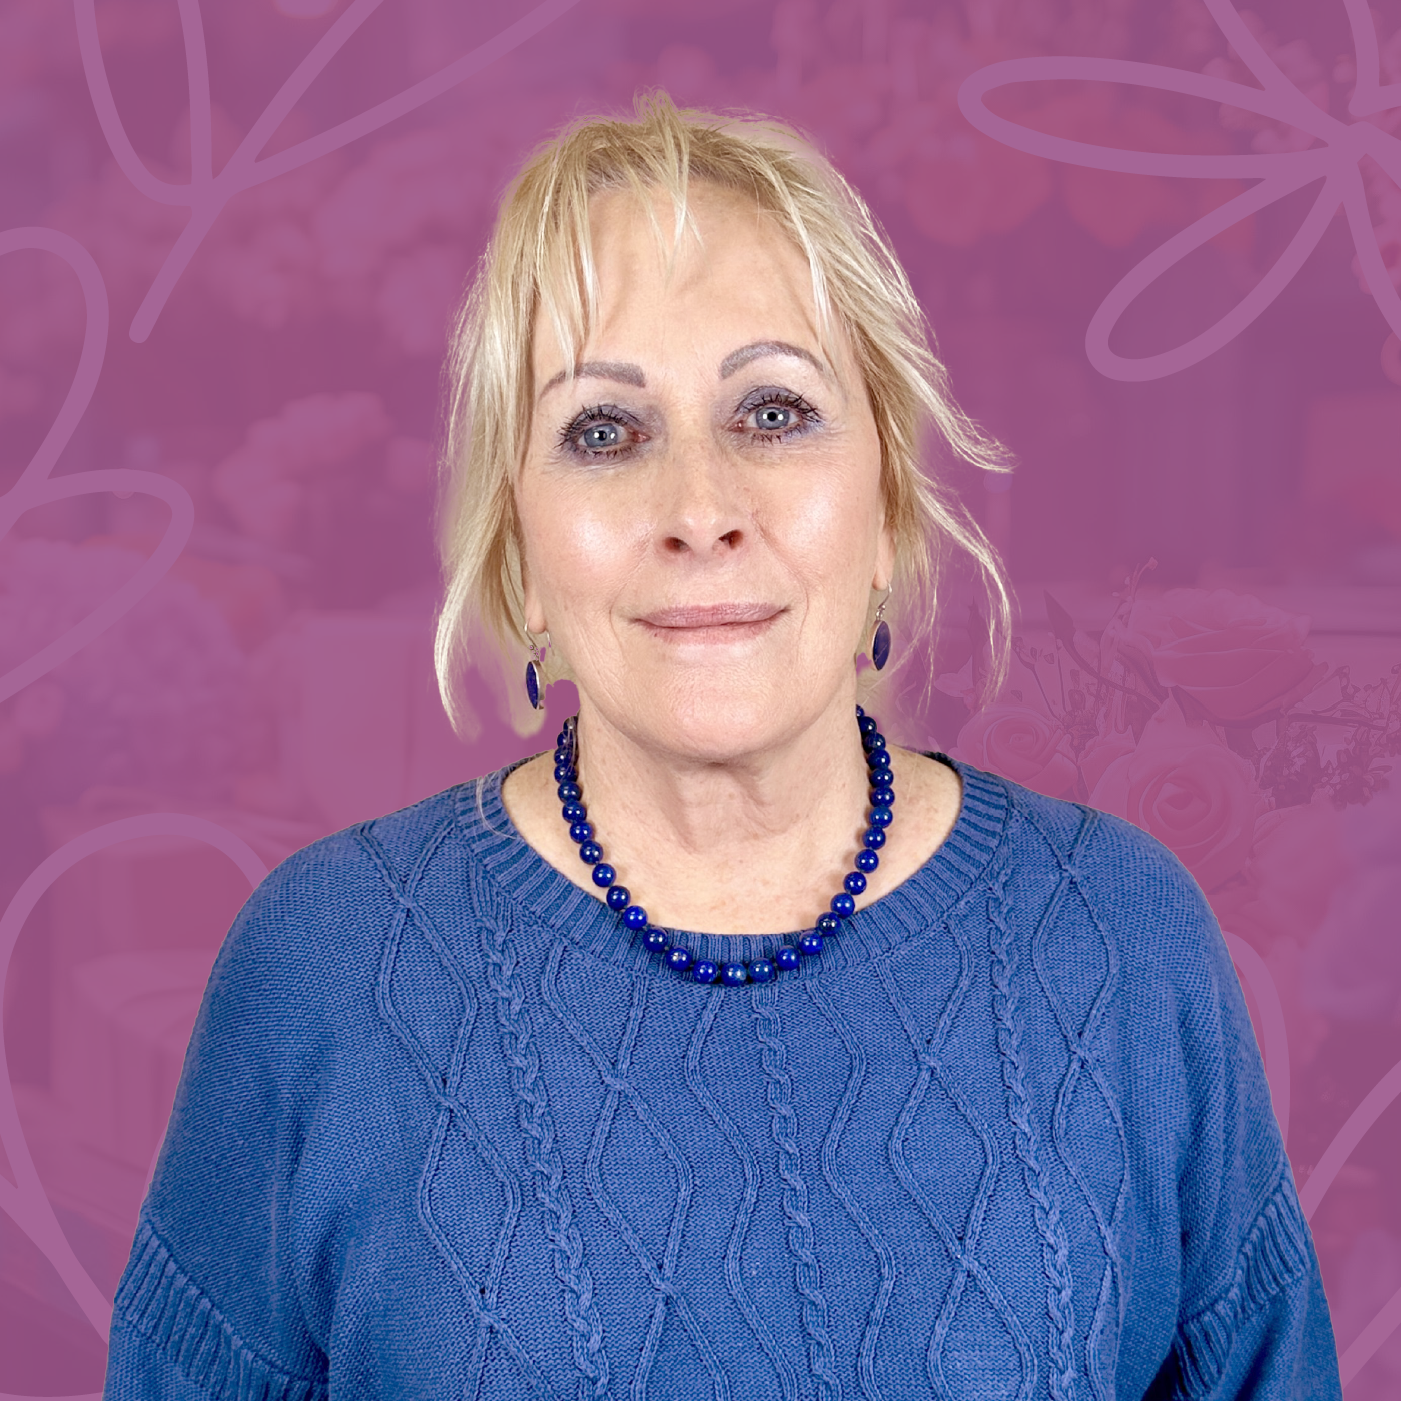 Portrait of Josie van Aswegen, team member at Fabulous Flowers, smiling in a blue sweater with a beaded necklace against a purple background with floral designs. MEET THE TEAM at Fabulous Flowers and Gifts. Connect with Josie for expert floral and gift advice.